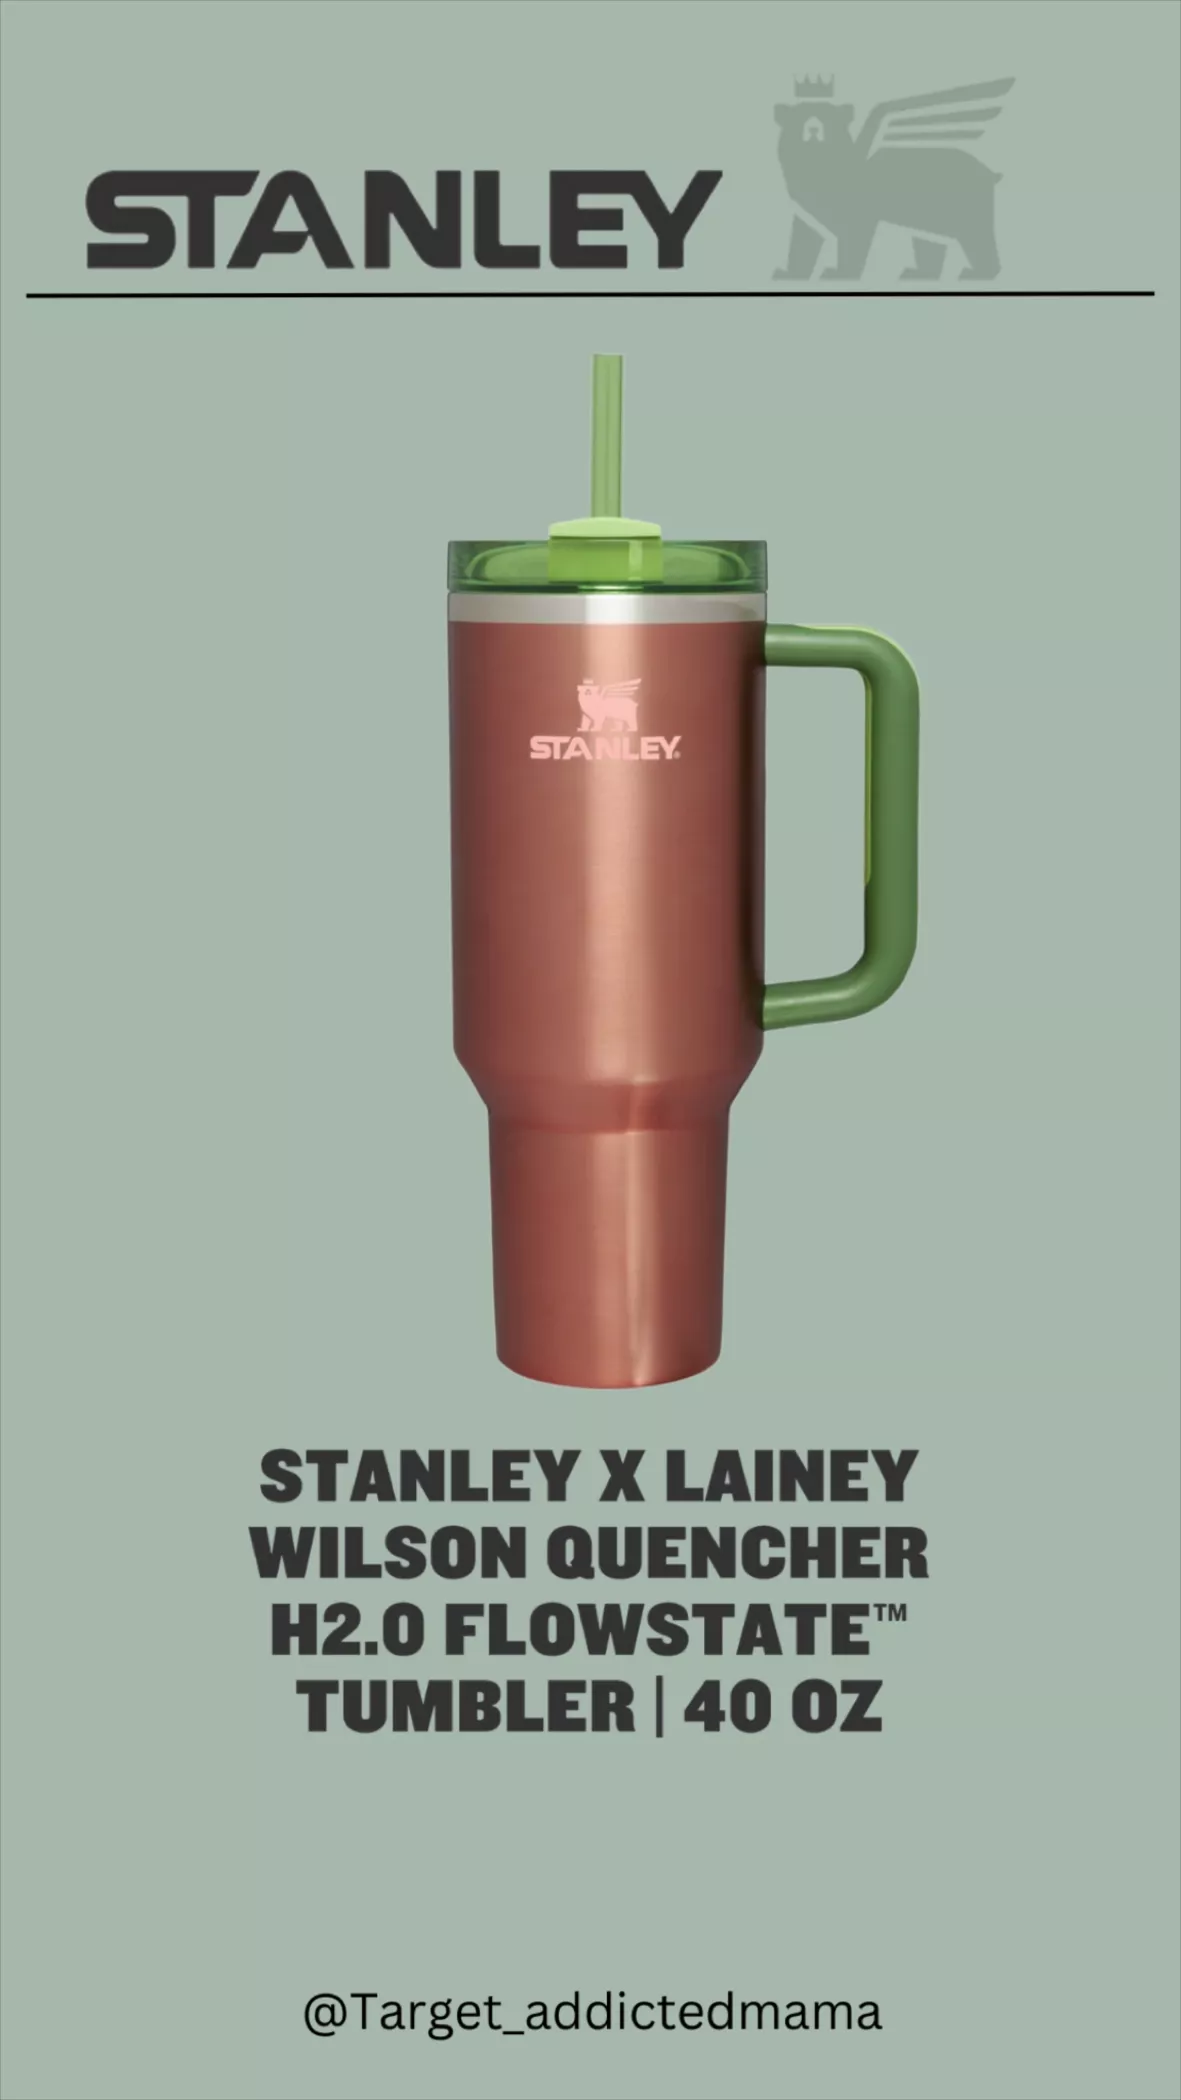 Lainey Wilson Teams Up With Stanley For Another Tumbler Release